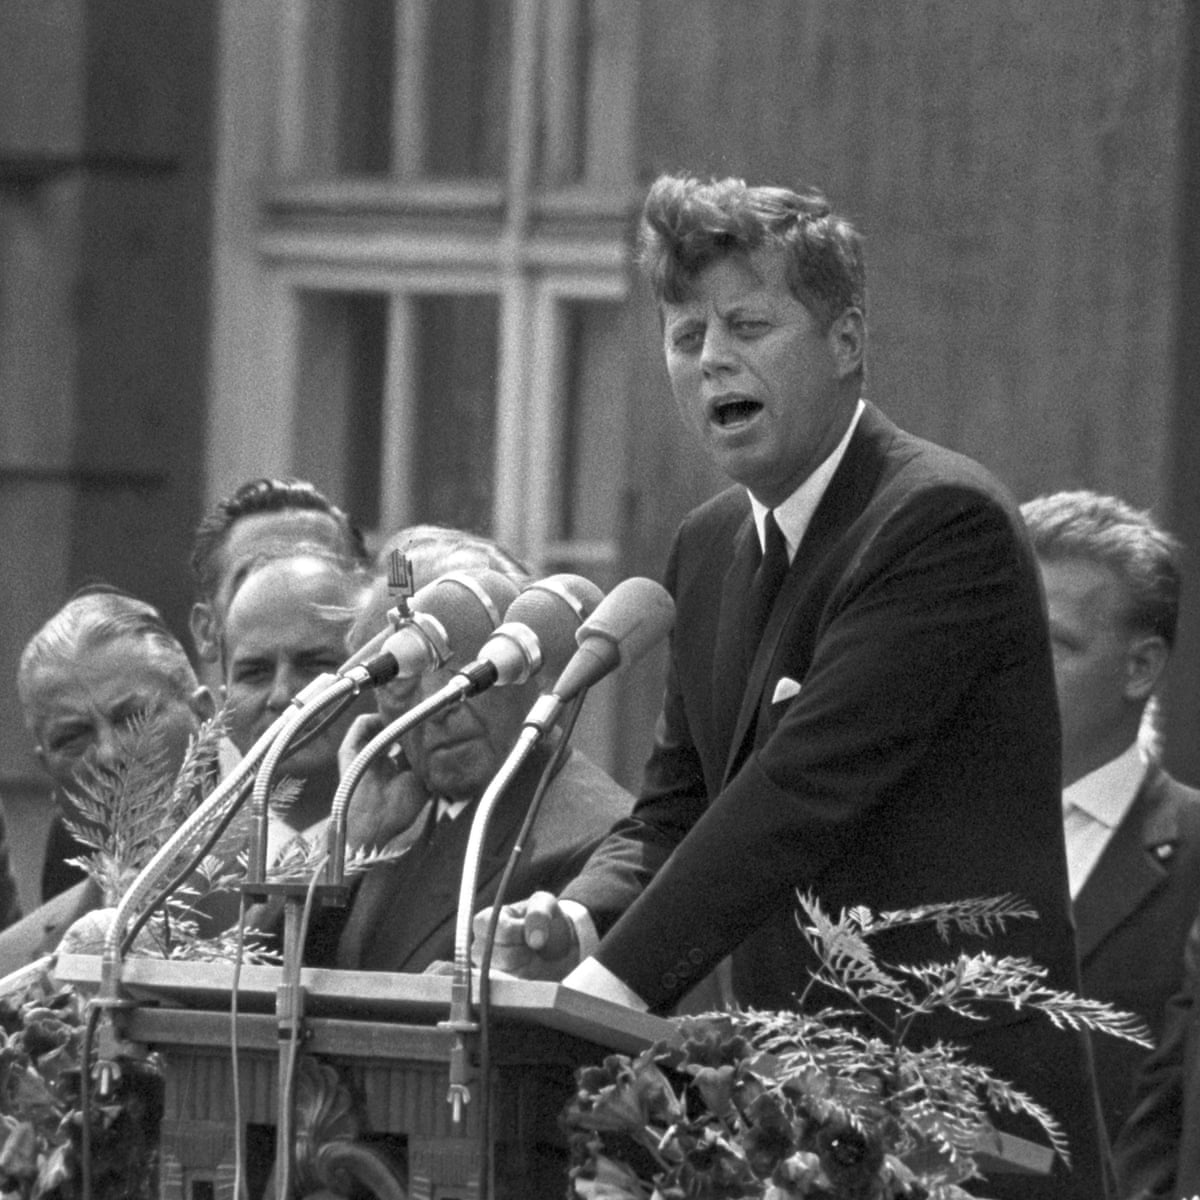 JFK's message beyond the grave – don't believe everything you hear John | The Guardian